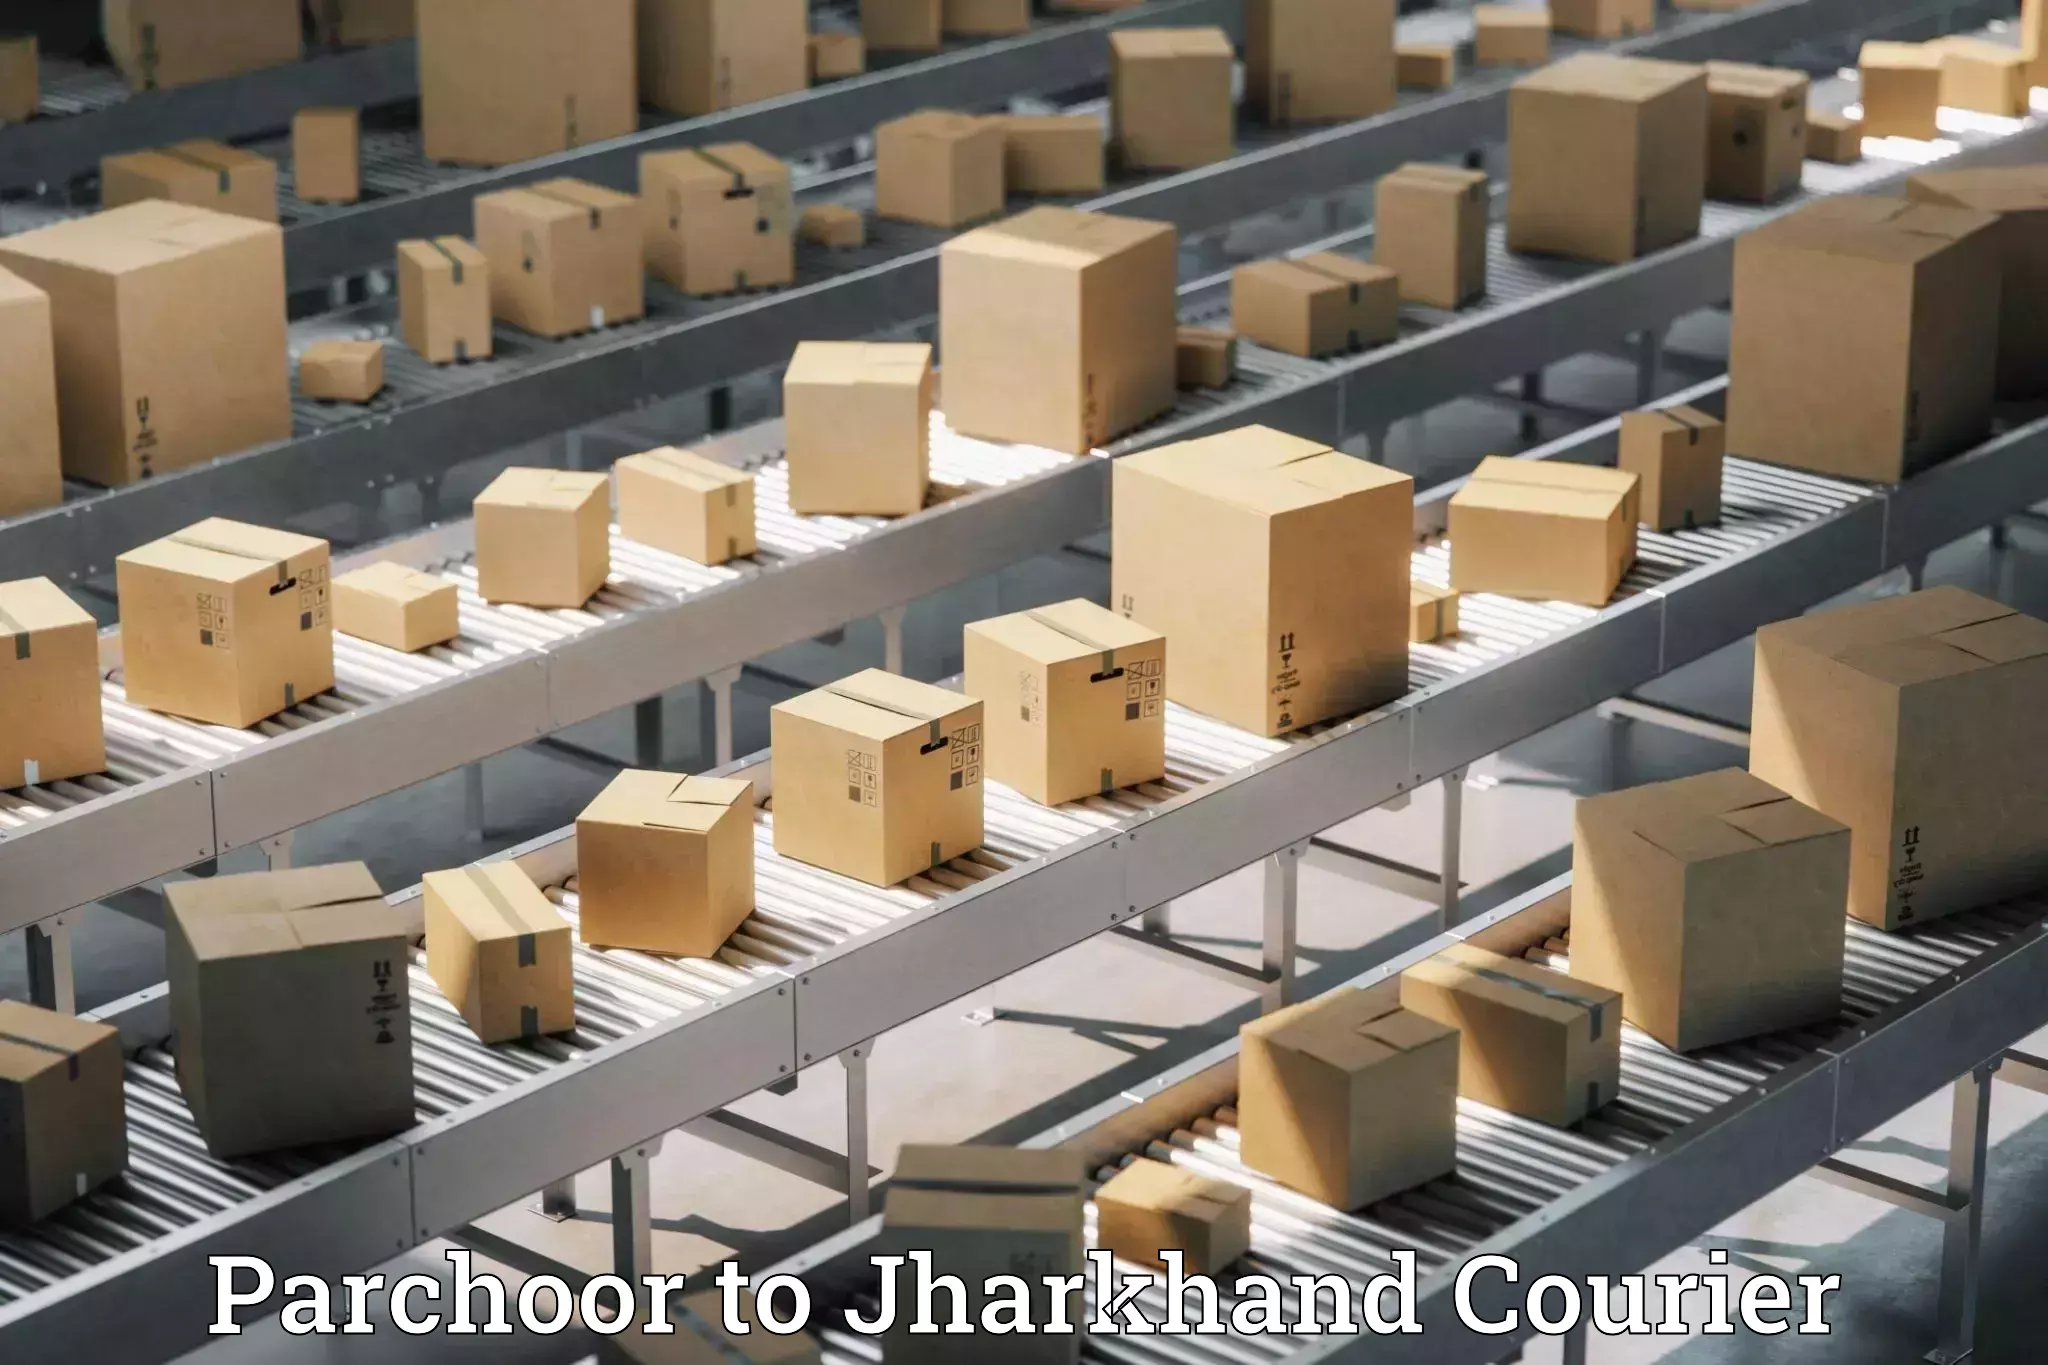 Express mail service Parchoor to Jharkhand